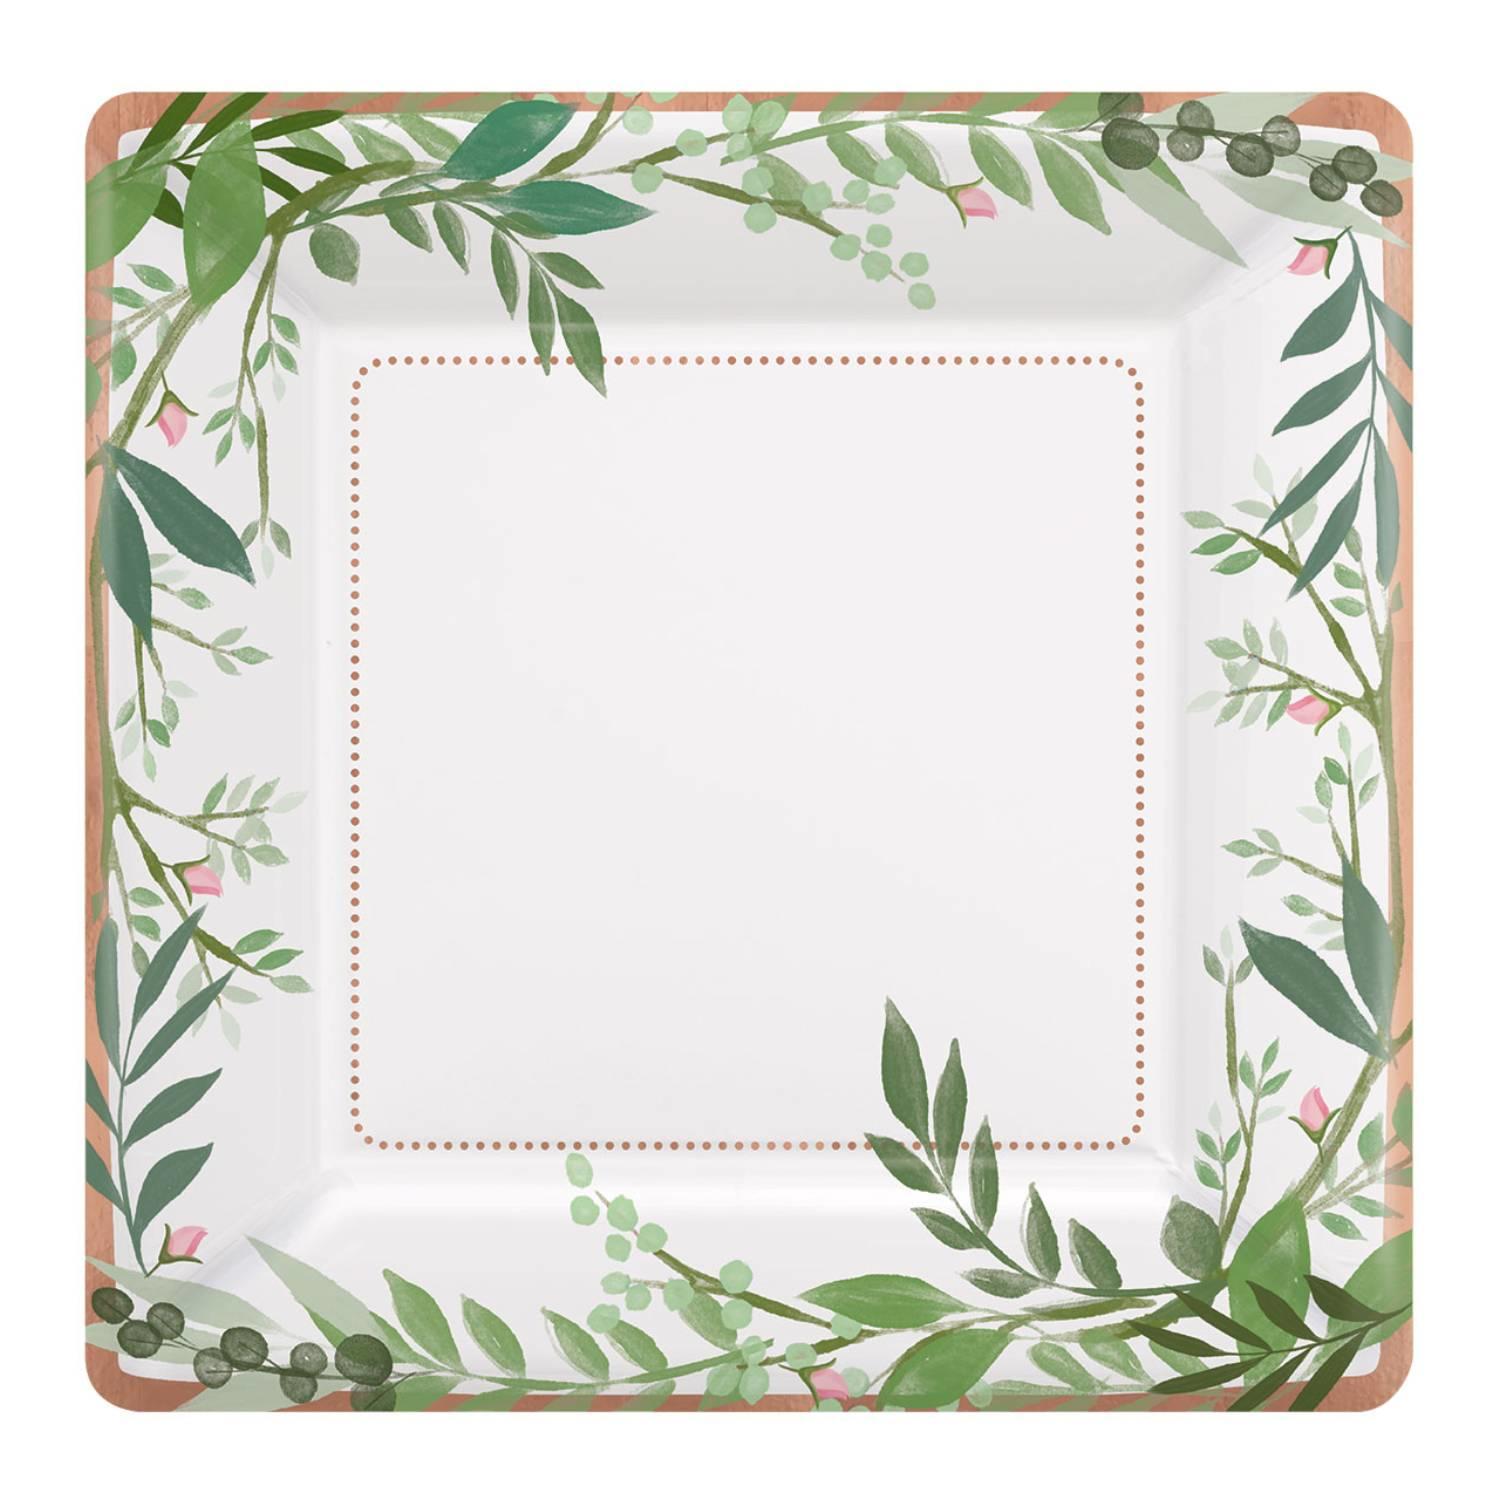 Love and Leaves 18cm Square Dessert Plates by Amscan 542143 available here at Karnival Costumes online party shop